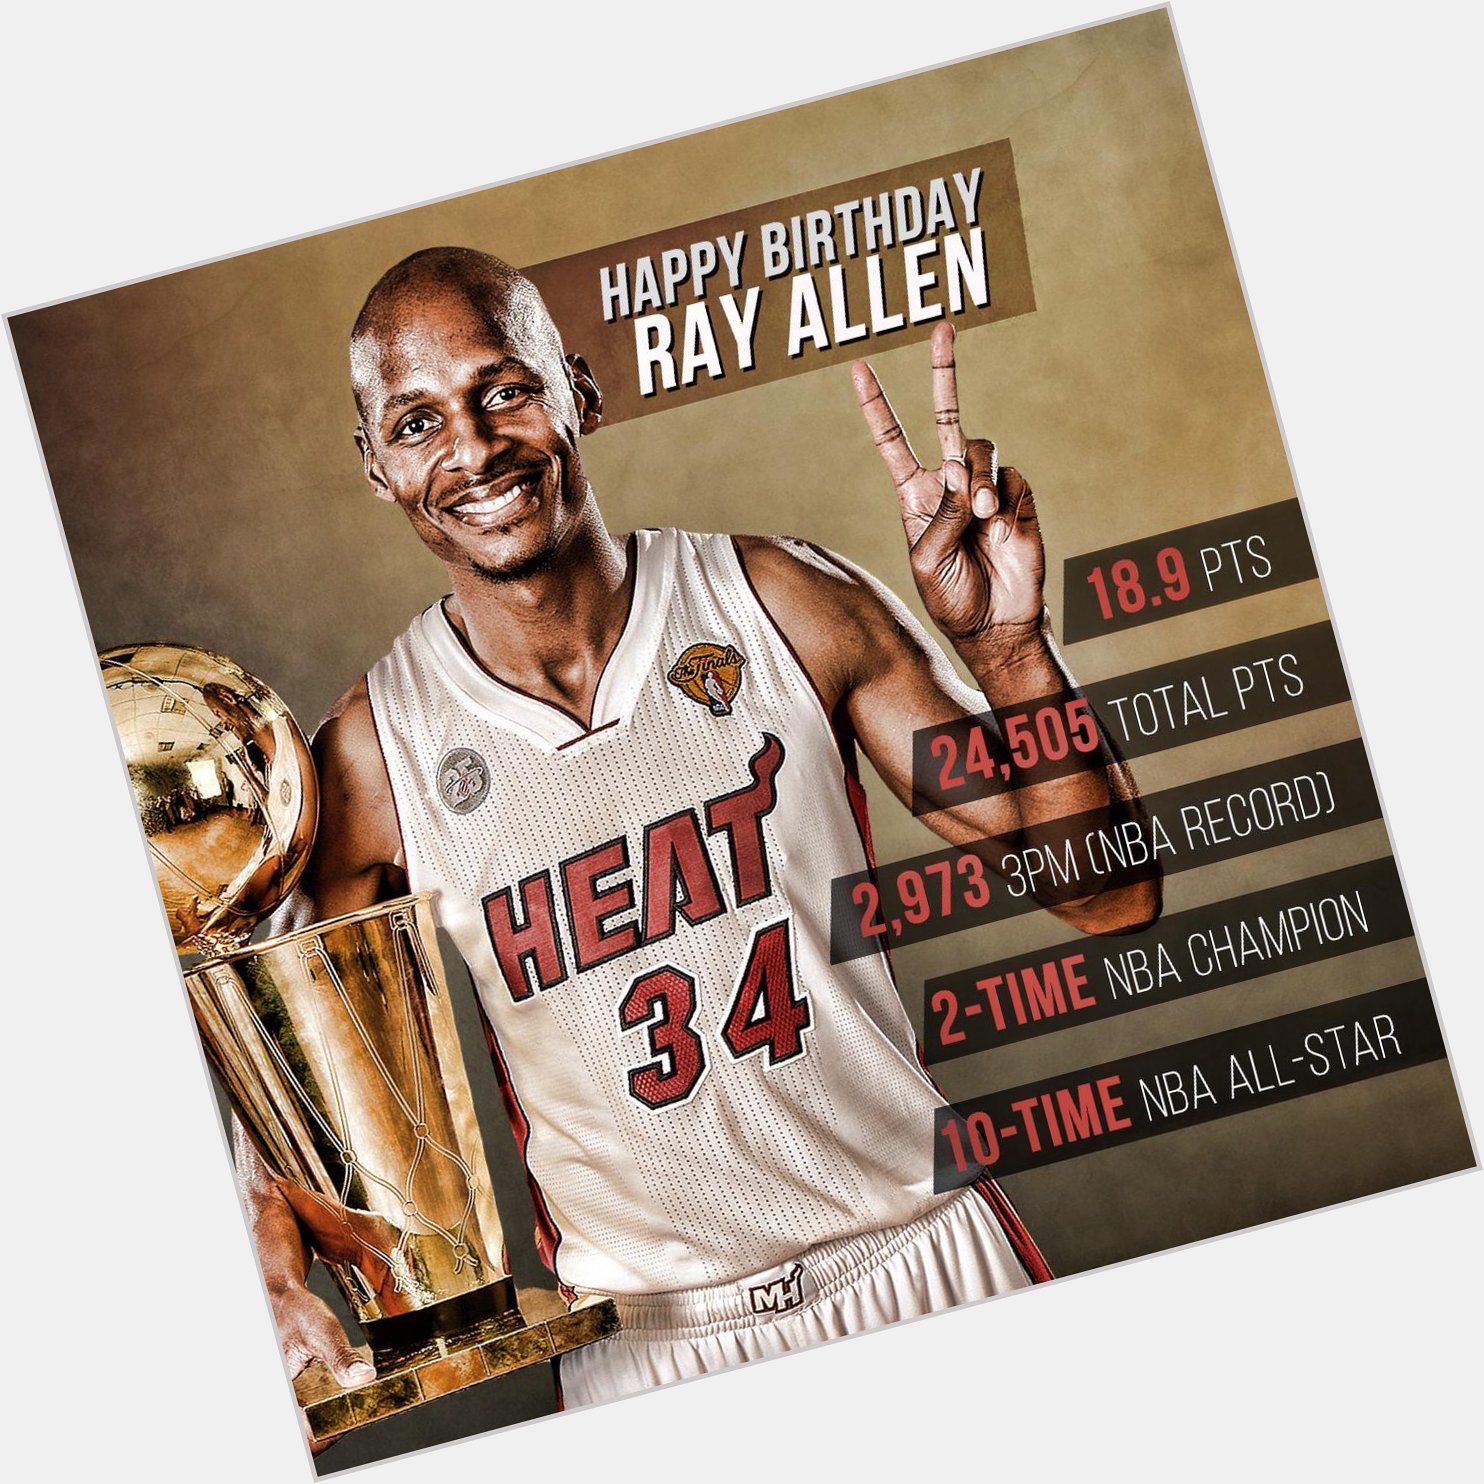 Join us in wishing a Happy 40th Birthday to Ray Allen! 